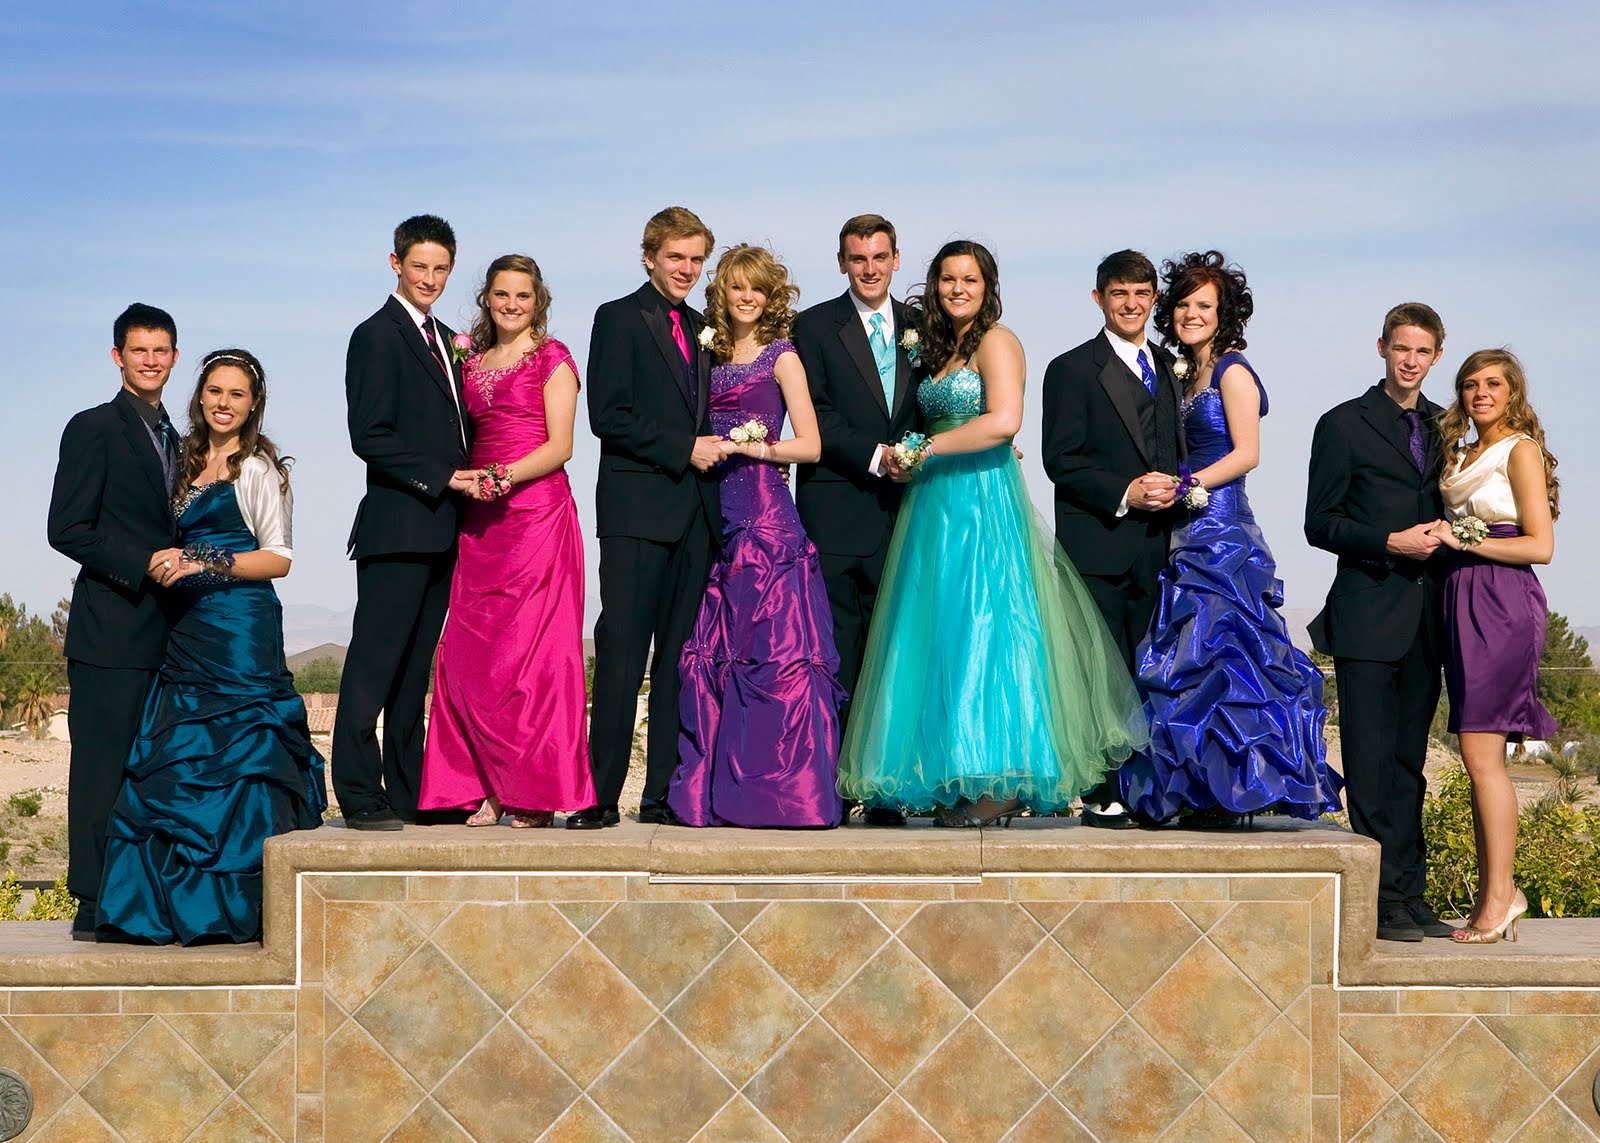 Prom 2010 Group.